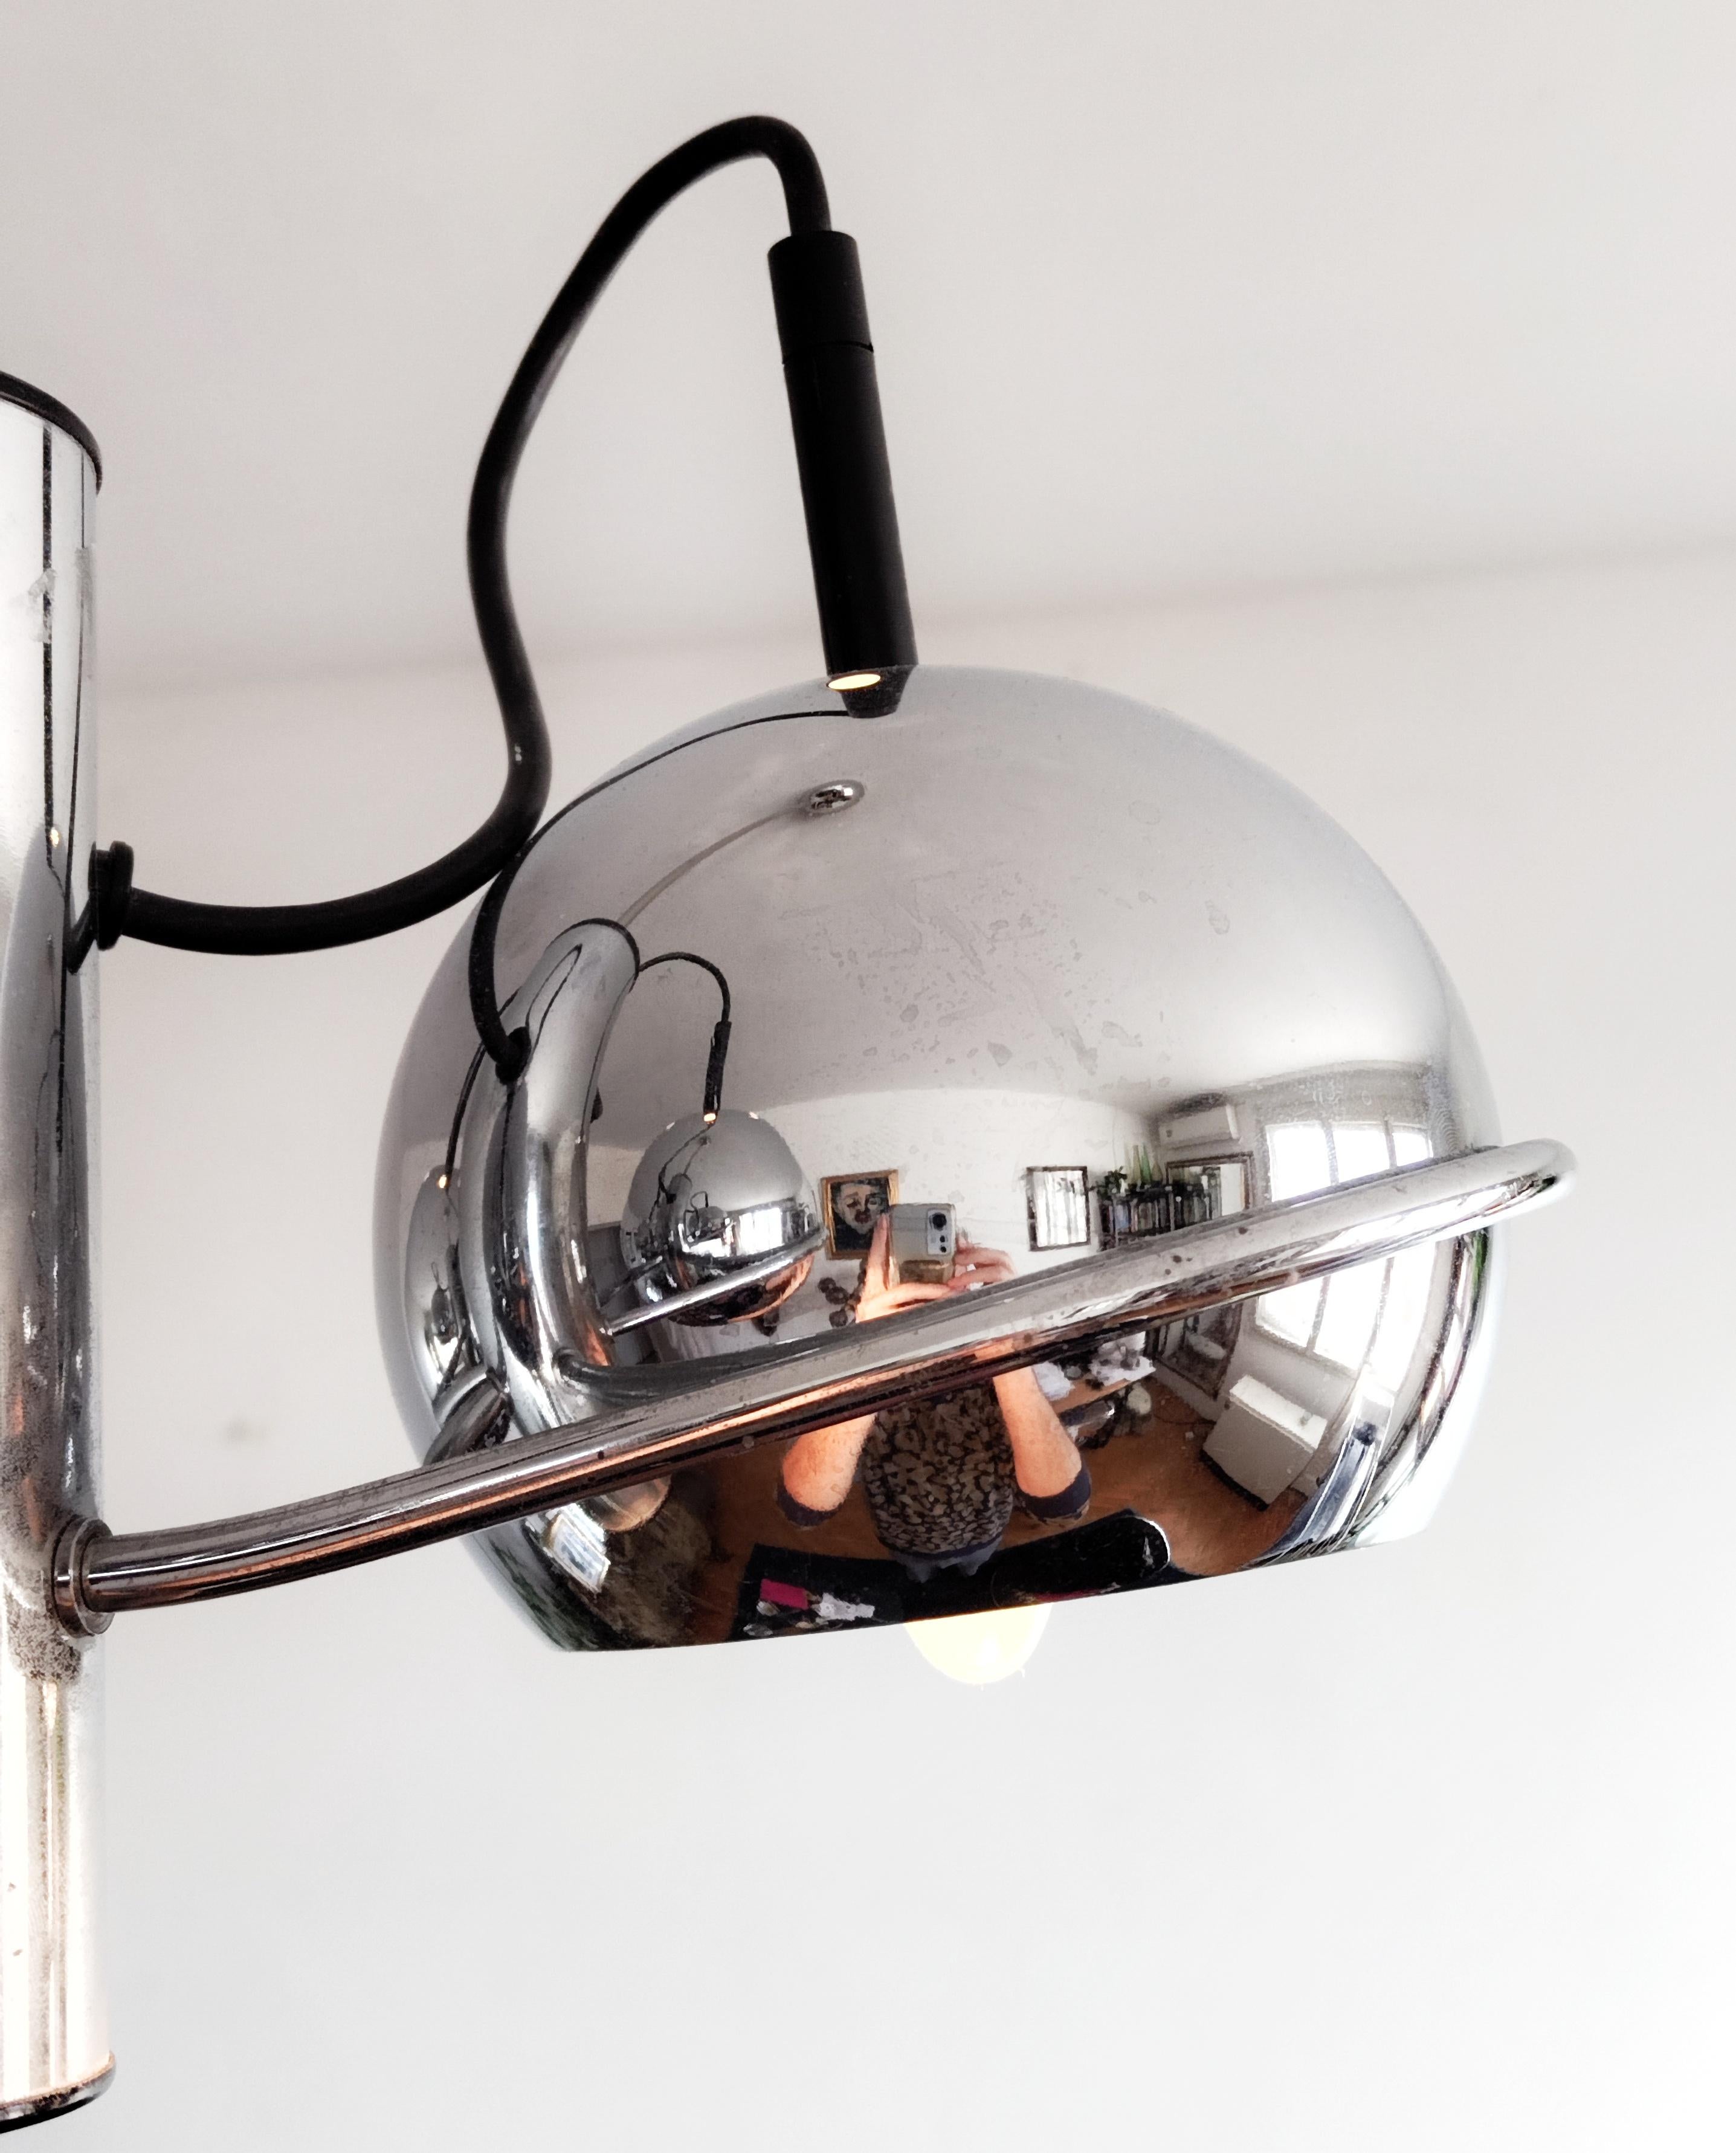 Wonderful hanging lamp made of chromed aluminum in the 60's in Italy. The vintage ceiling lamp is formed by a central stem in chromed aluminum in silver color. The lights are hidden within the 3 eyeball shaped shades and are positioned under a